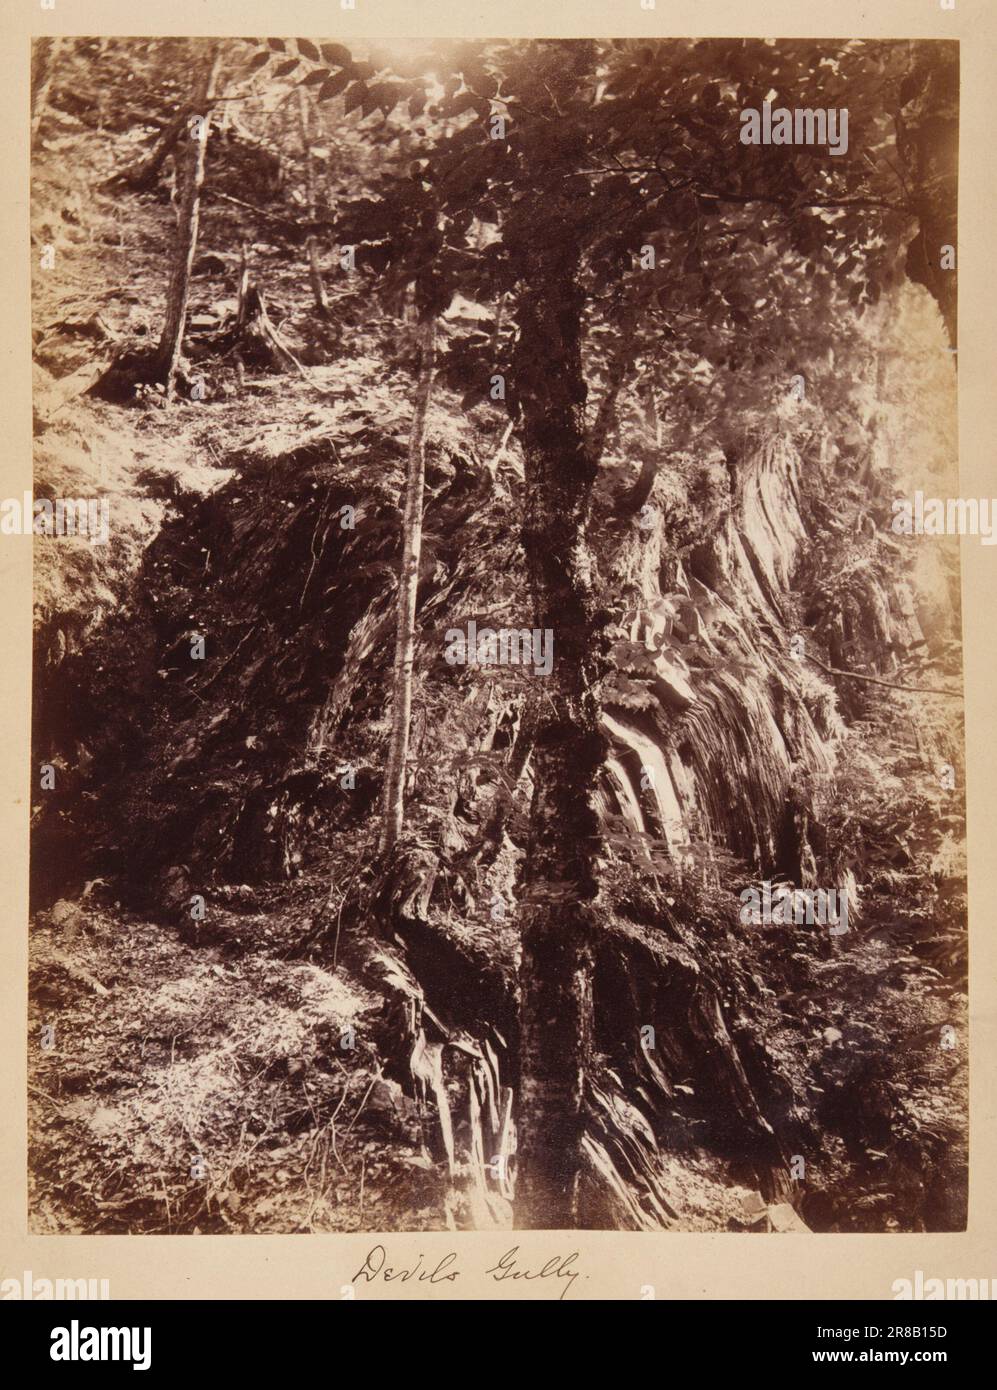 Devil's Gully, from the album Views of Charlestown, New Hampshire 1888 by Gotthelf Pach, active 1880s Stock Photo